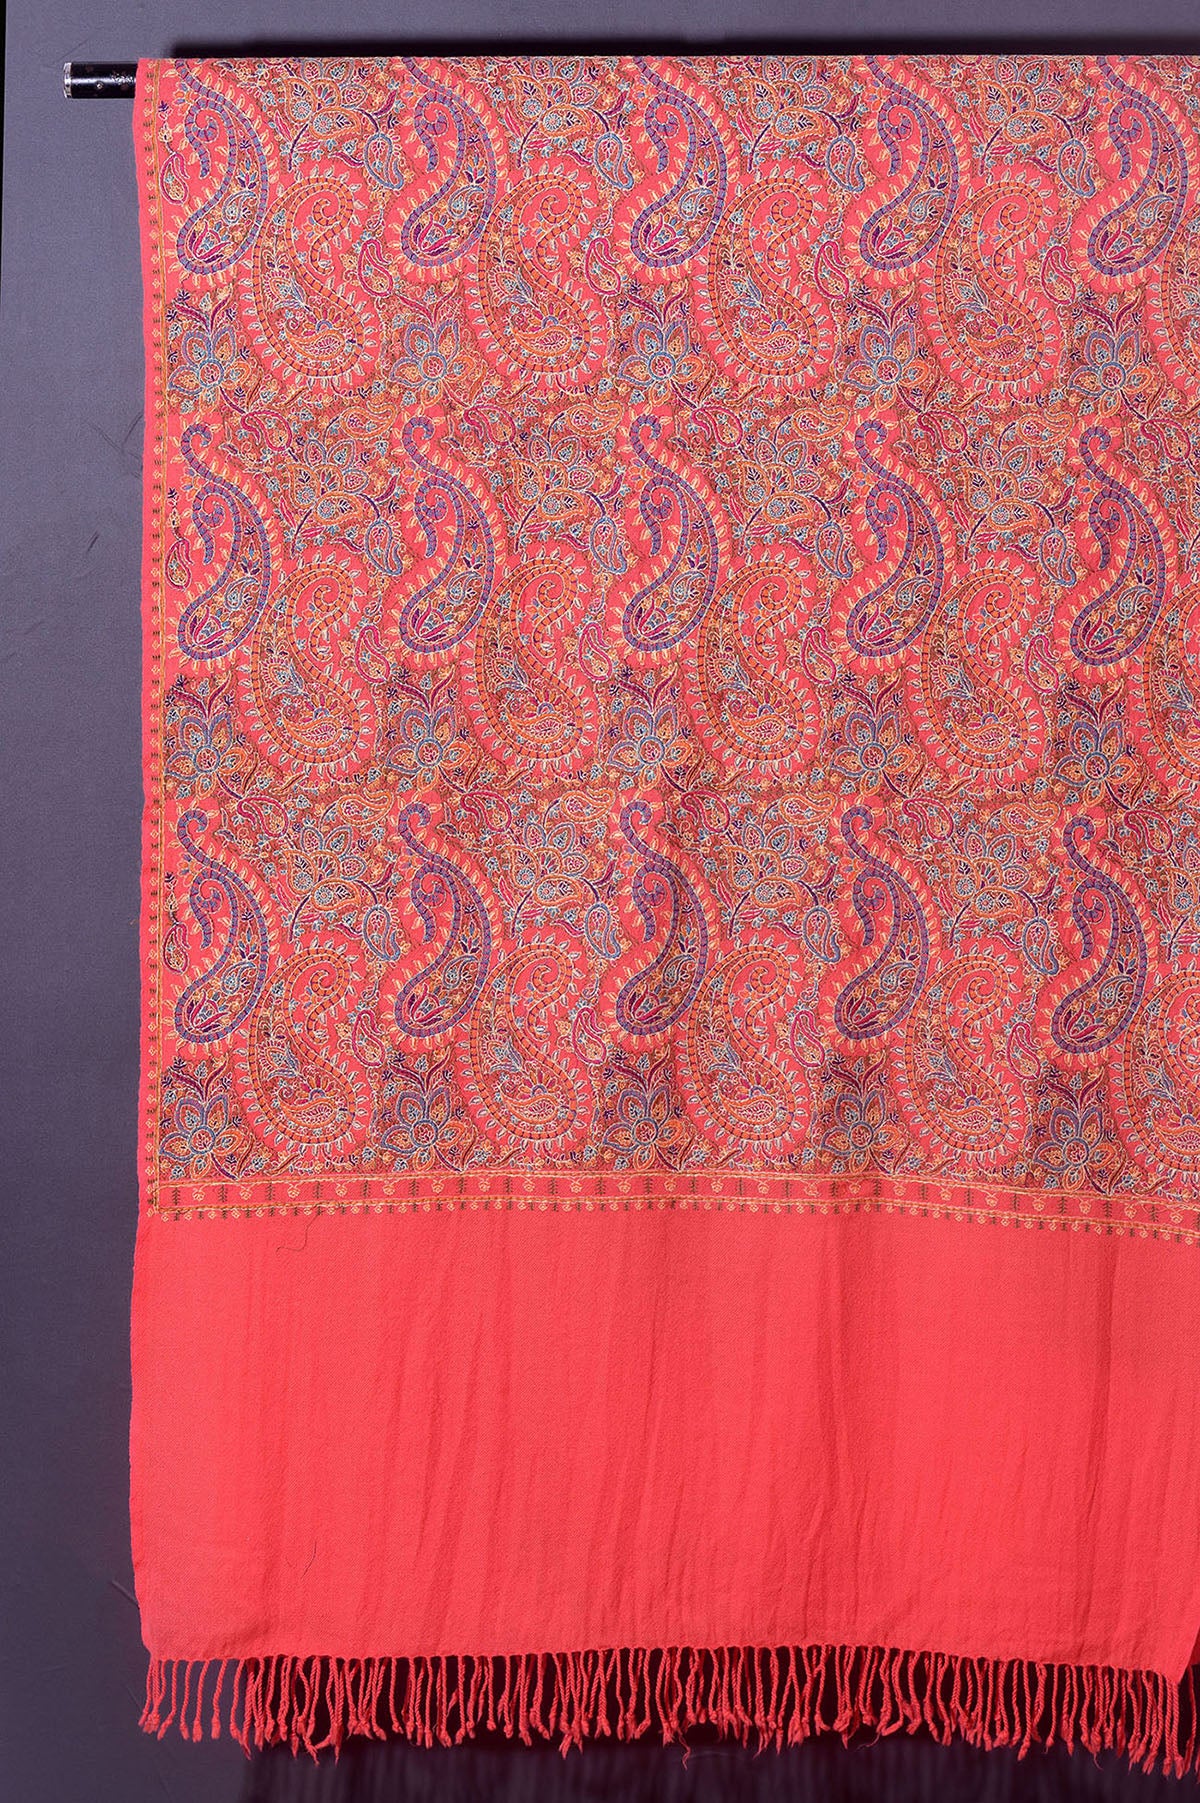 THE PAISLEY BUTA JAAL Exquisite Machine Embroidered Stole - Blush Coral with Multicolor Paisley